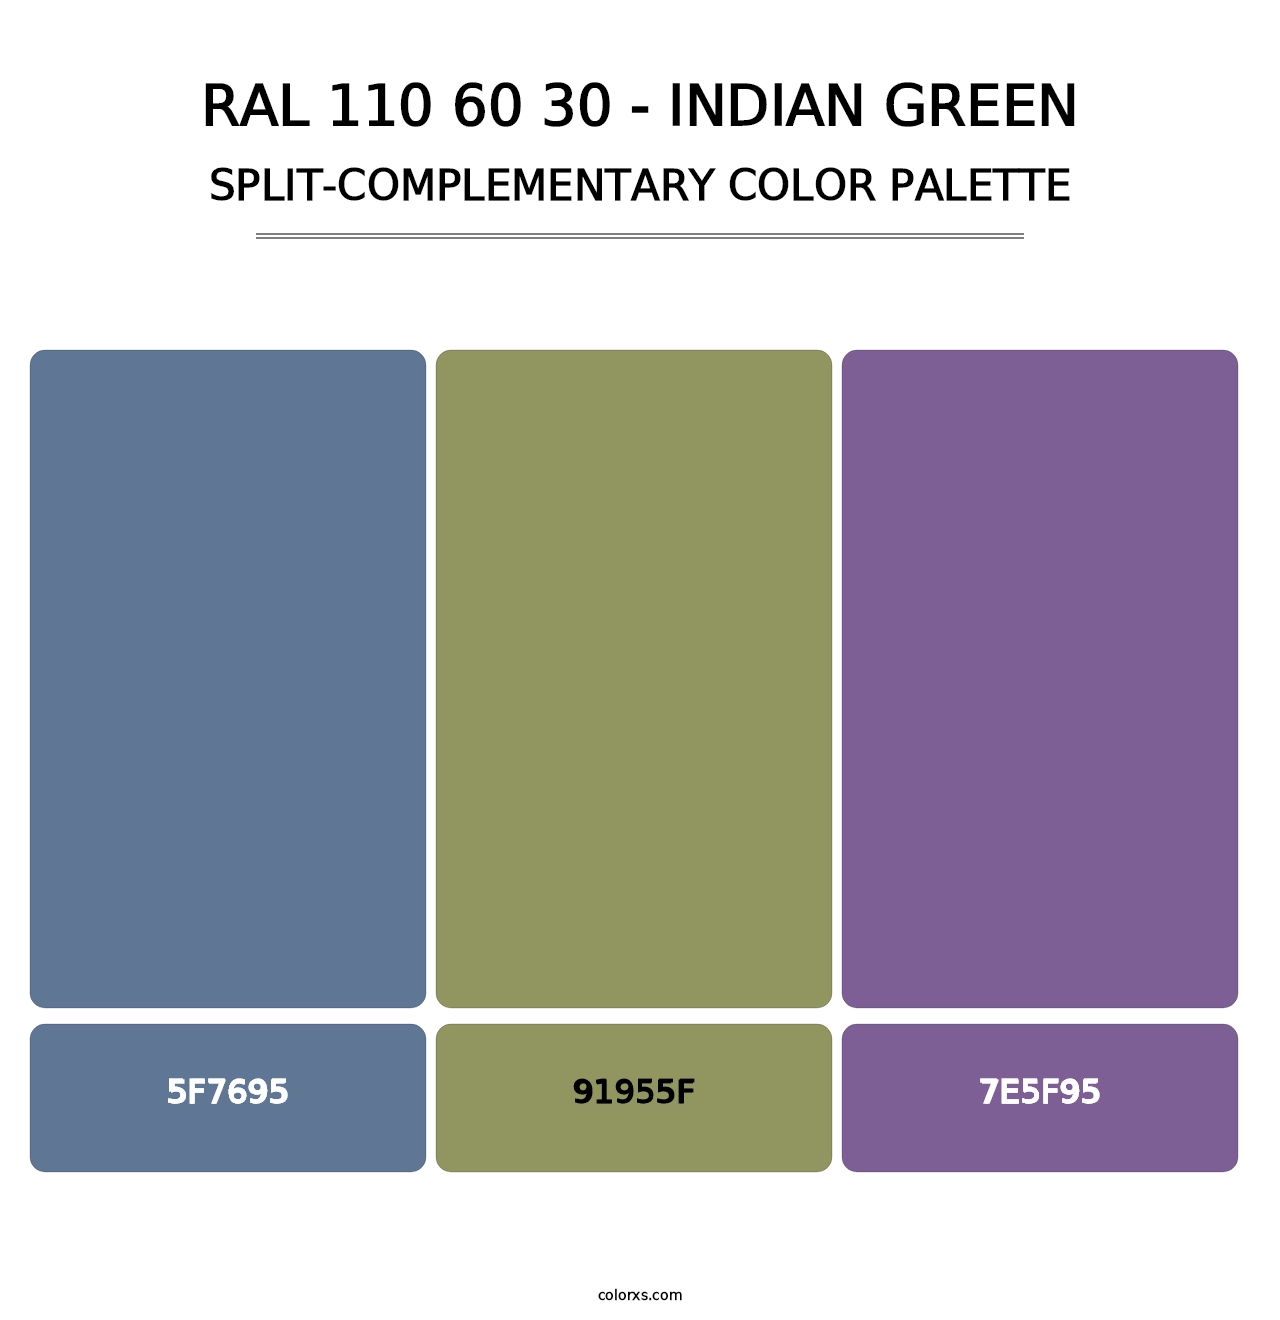 RAL 110 60 30 - Indian Green - Split-Complementary Color Palette